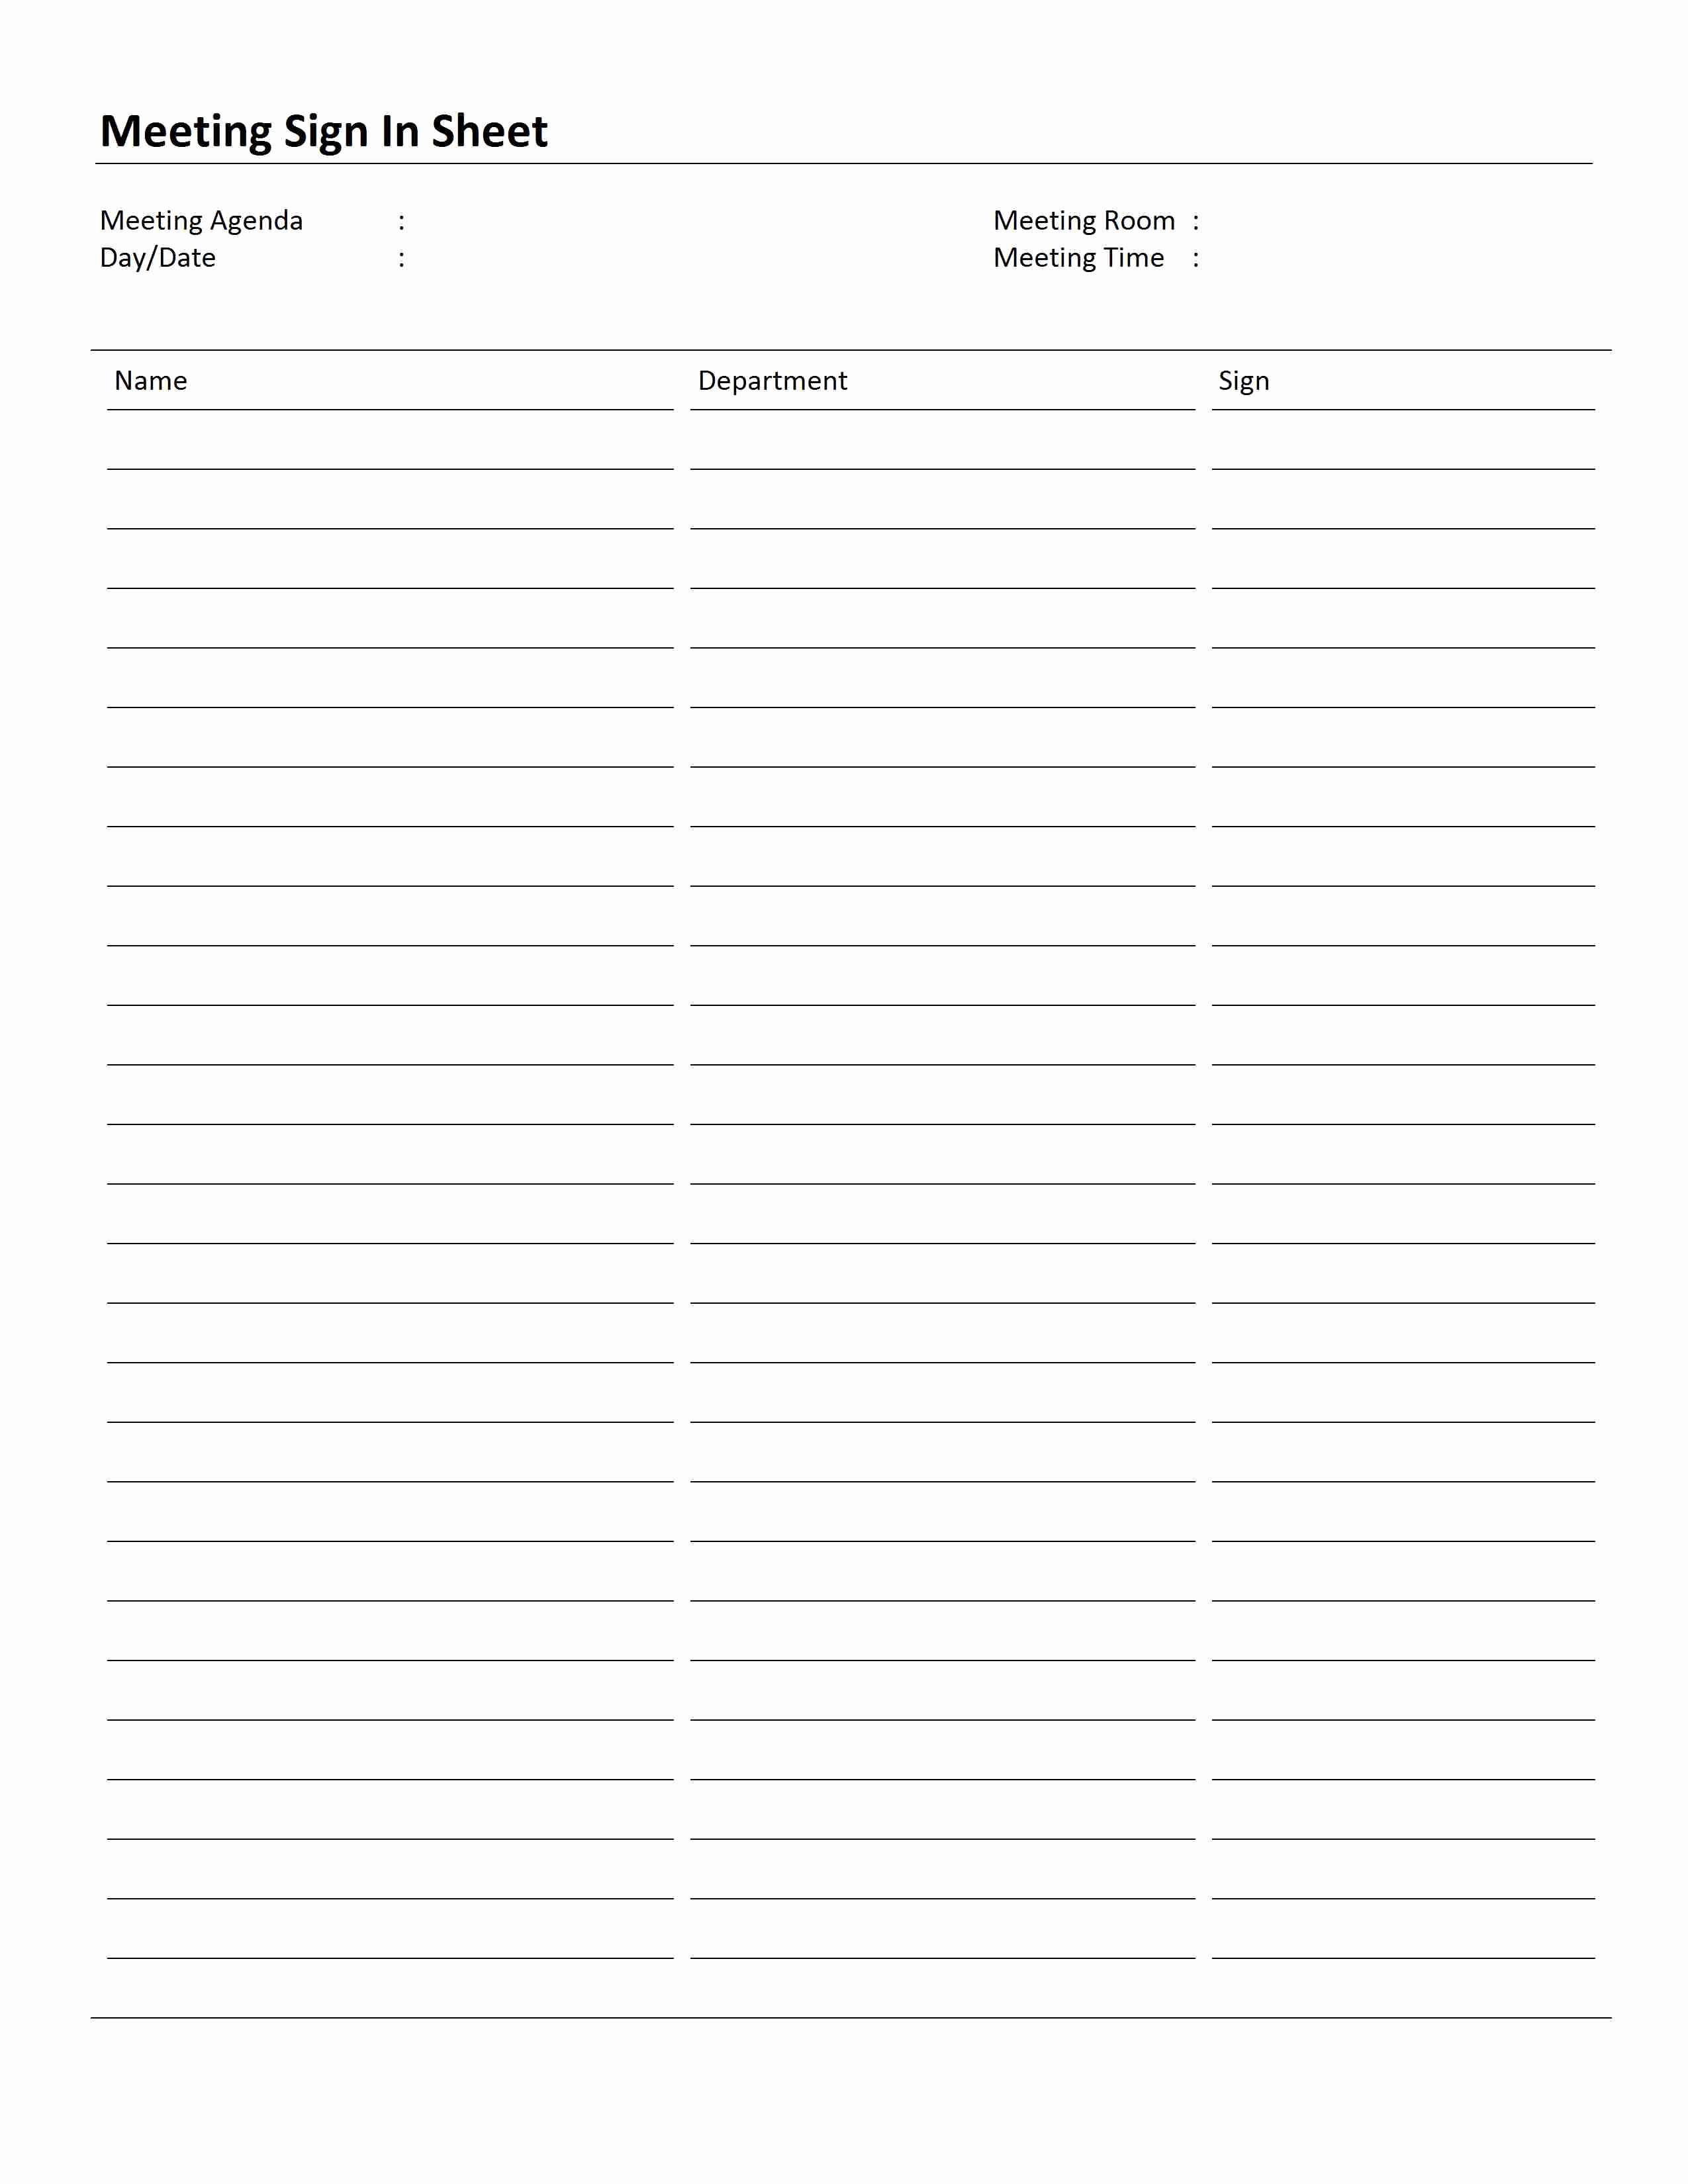 Sign In Sheet Template Word New Meeting Sign In Sheet